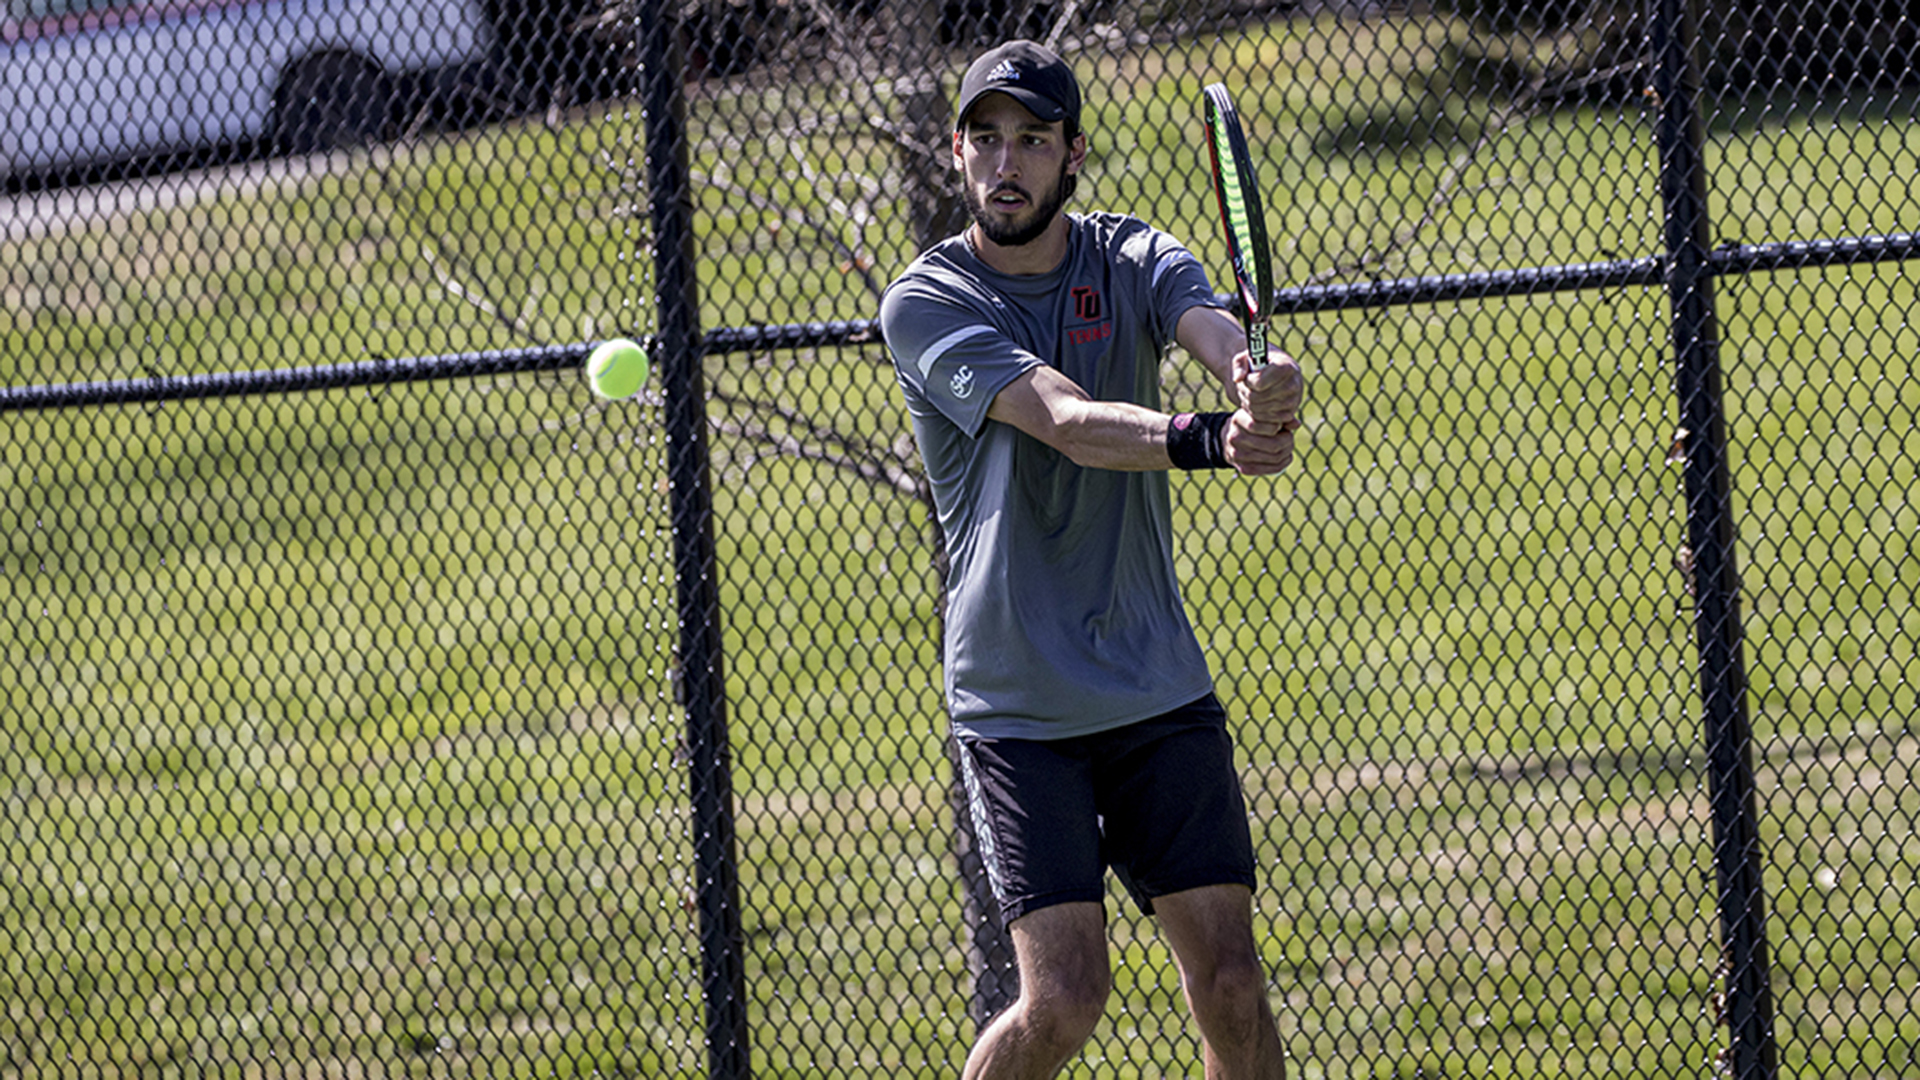 Manuel Almeida won in doubles and earned the clinching point in singles (photo by Chuck Williams)